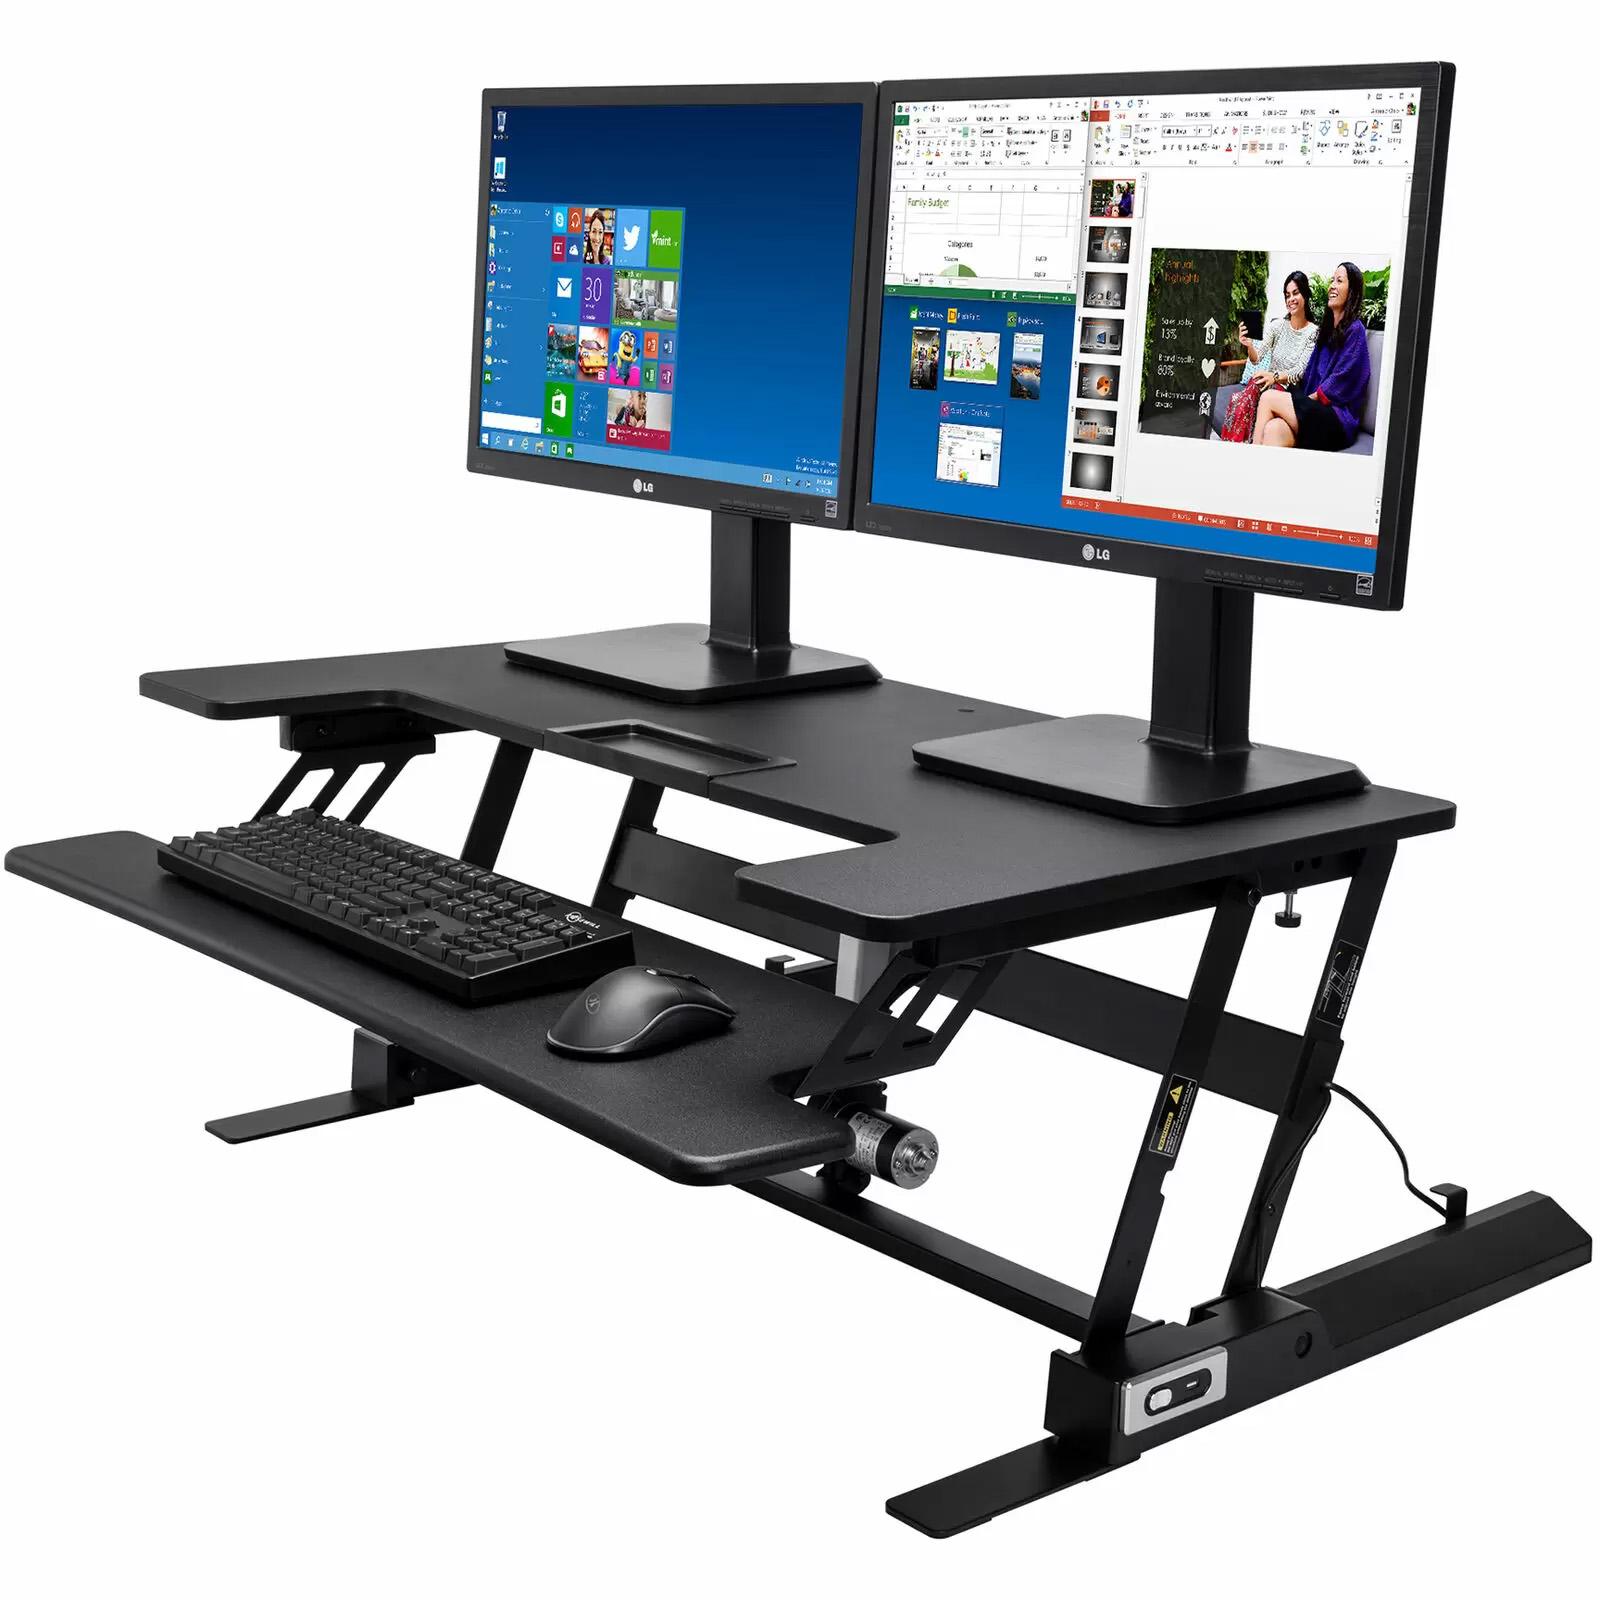 Rosewill Electric 36in Height Adjustable Sit Stand Desk for $84.99 Shipped